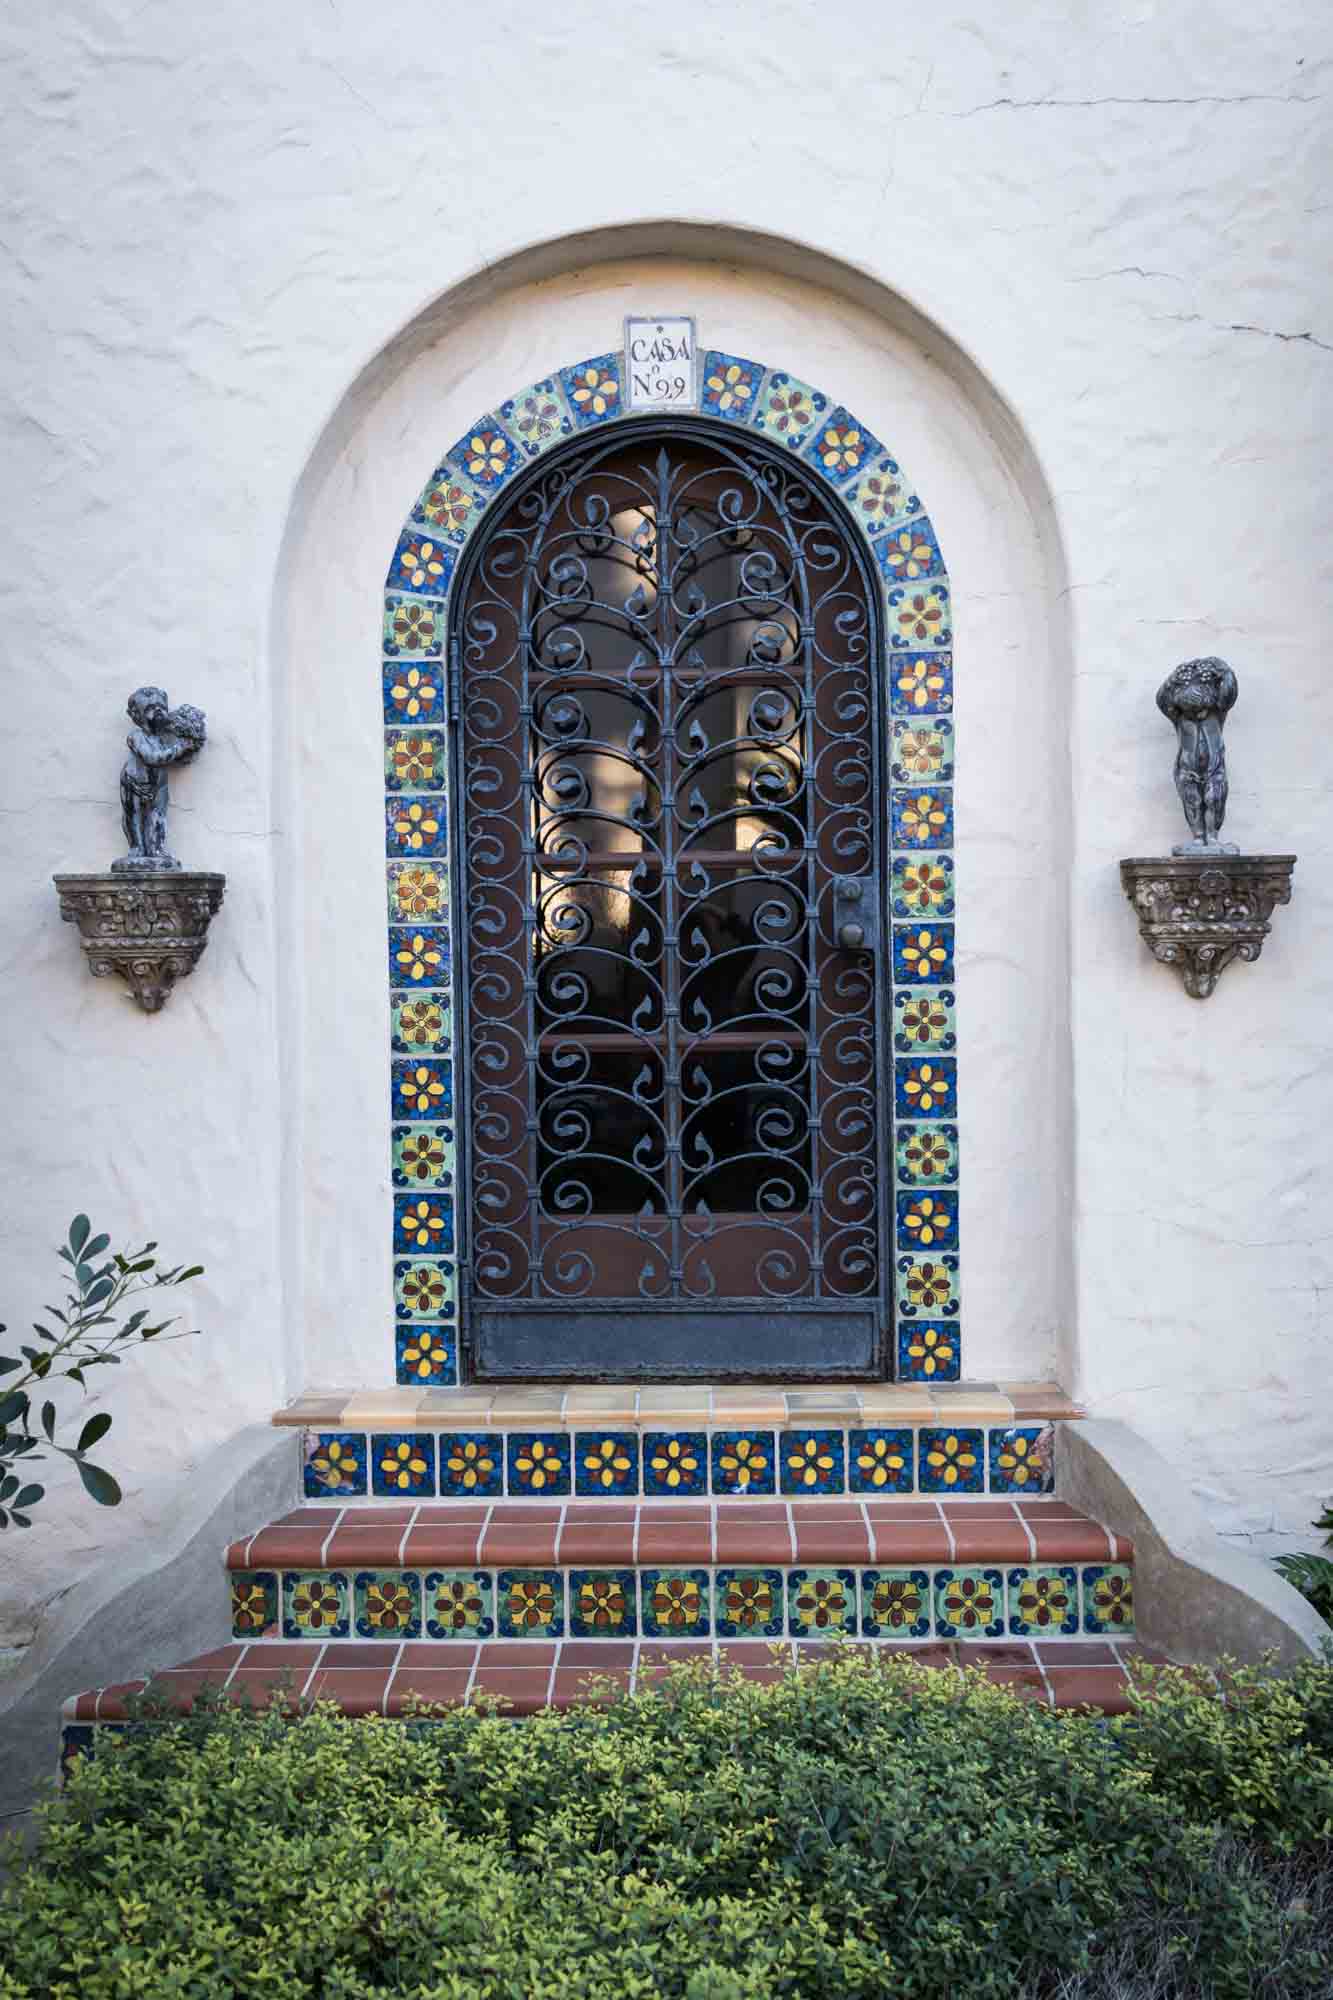 Doorway surrounded by colorful tiles in Blackburn Patio for an article on how to take photos at the McNay Art Museum